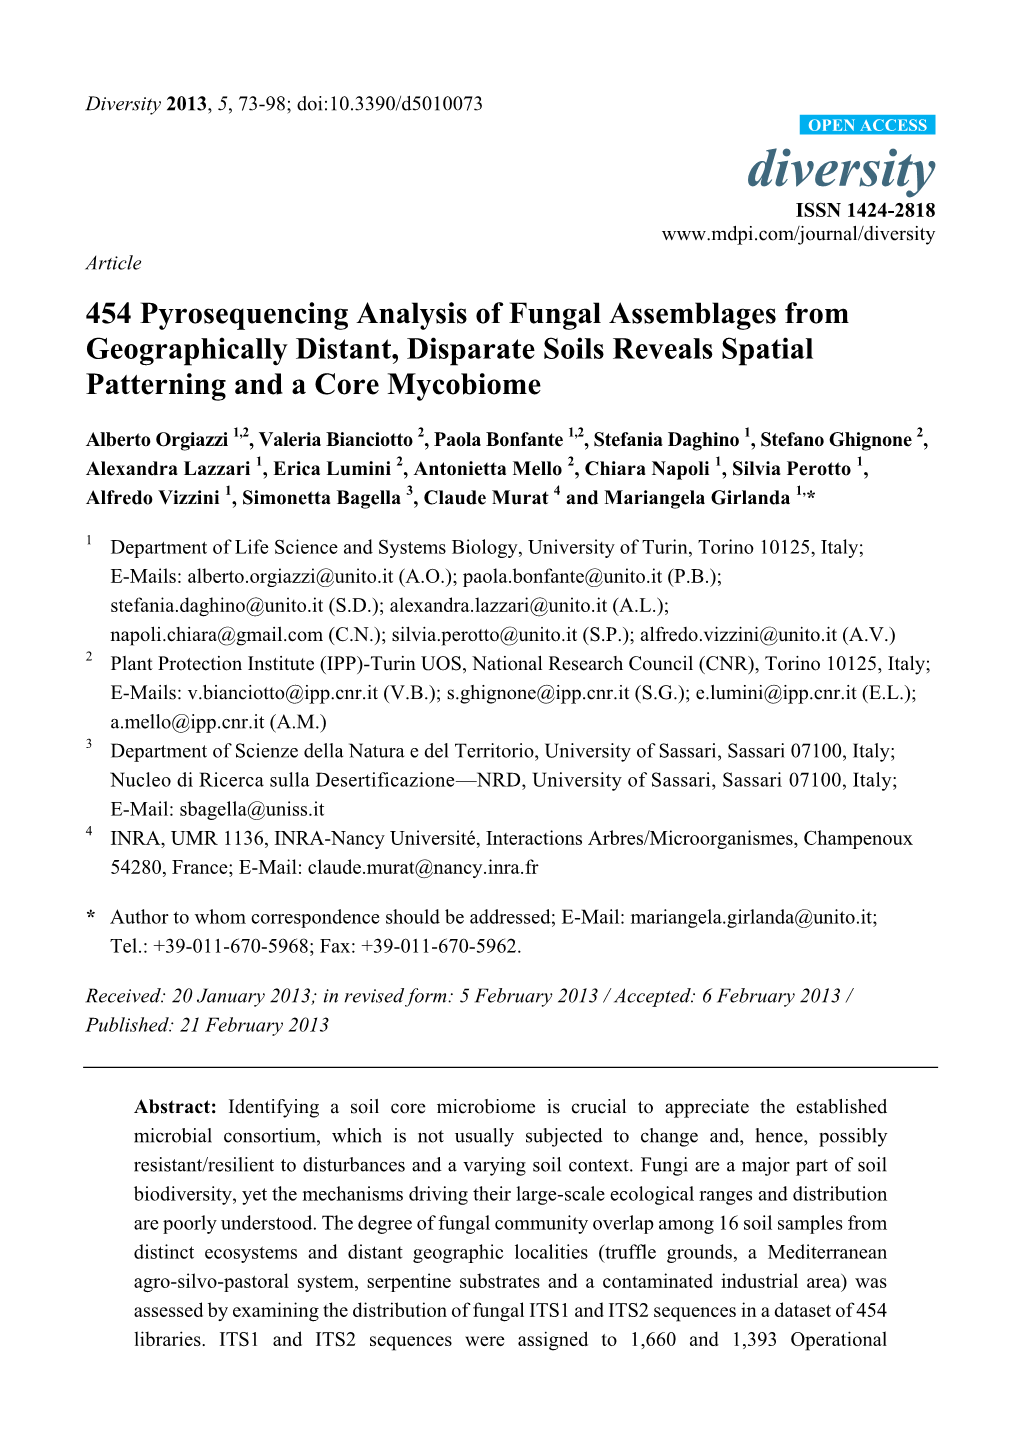 454 Pyrosequencing Analysis of Fungal Assemblages from Geographically Distant, Disparate Soils Reveals Spatial Patterning and a Core Mycobiome